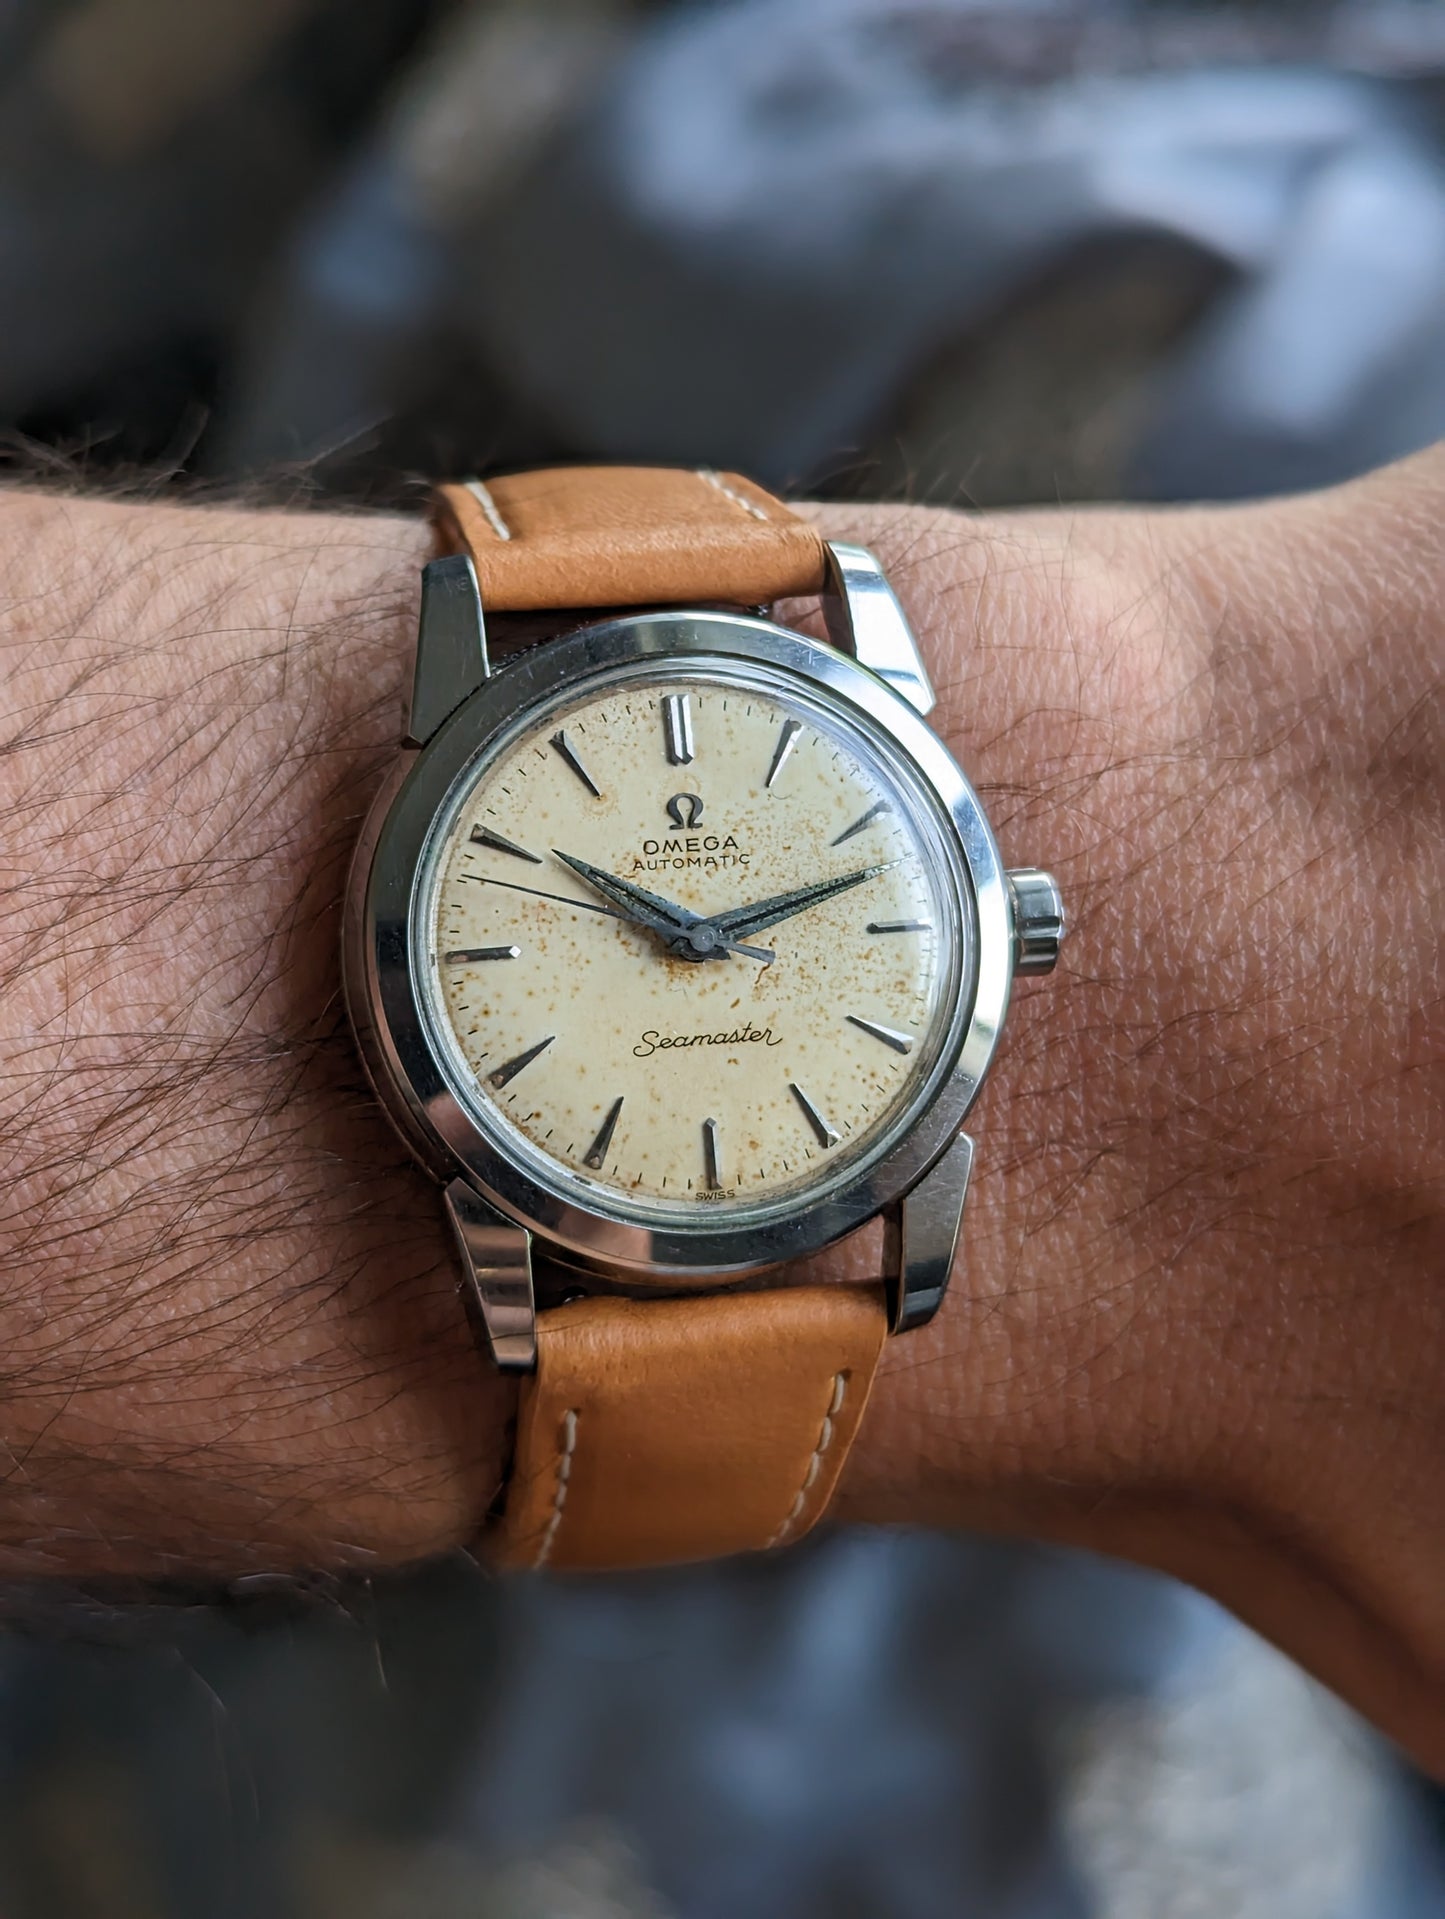 Omega Seamaster: Unpolished, serviced w/ 1yr warranty - My Personal Collection